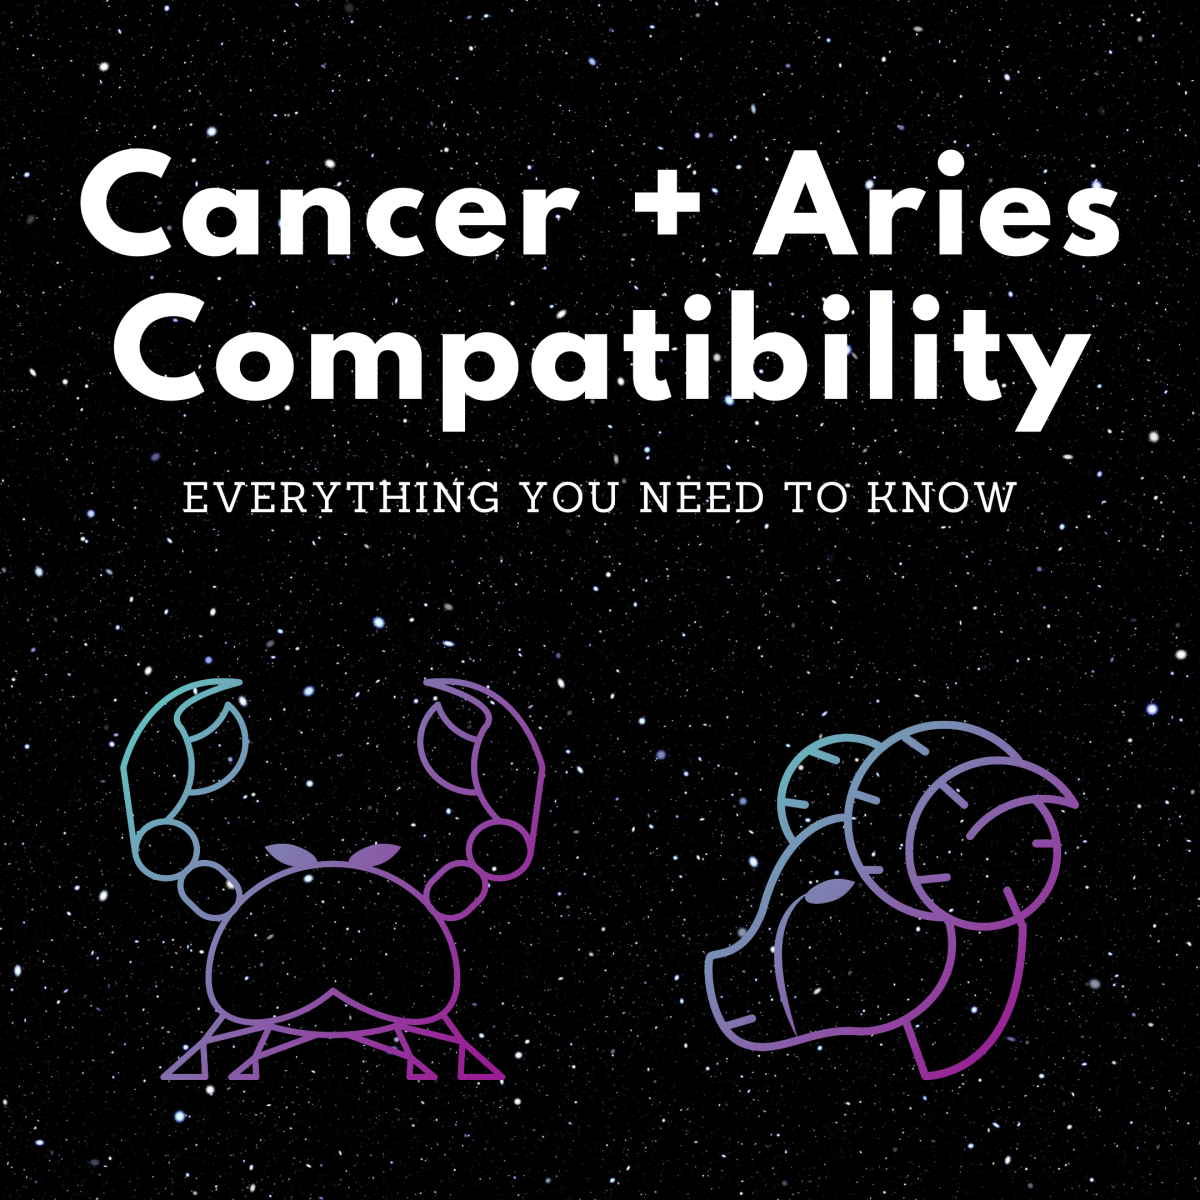 Who is not compatible with Aries?